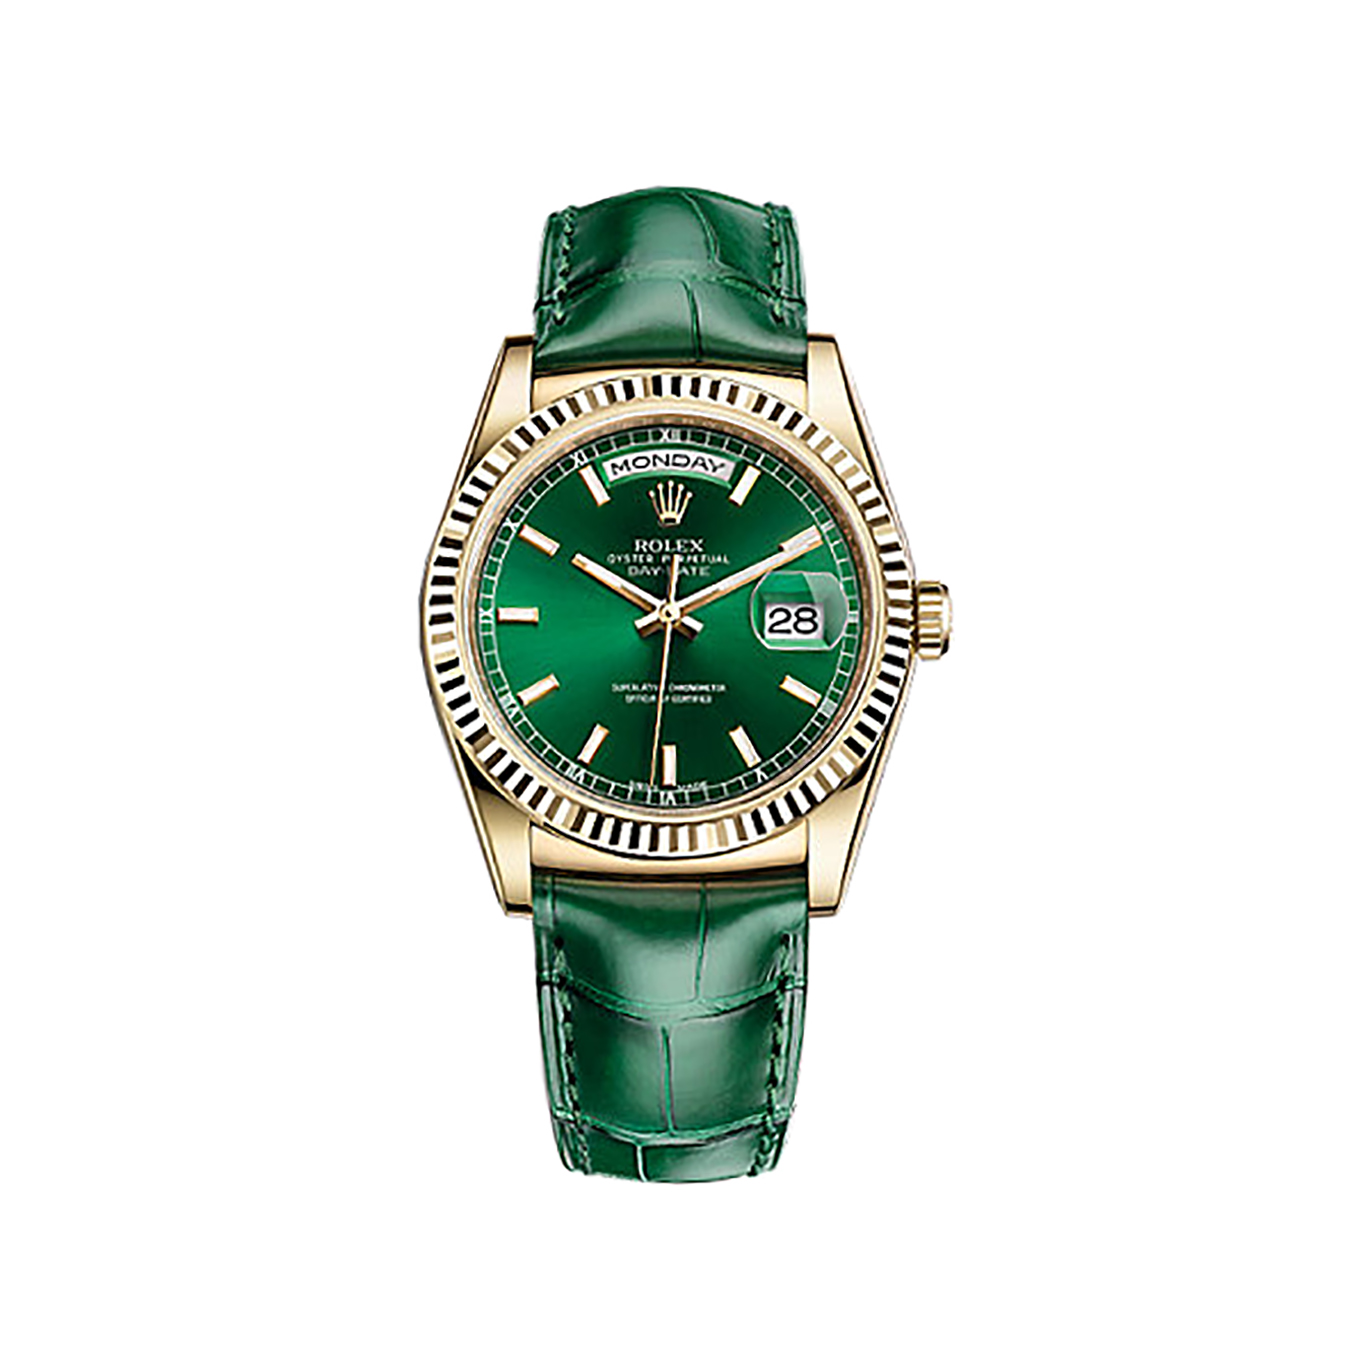 Day-Date 36 118138 Gold Watch (Green)